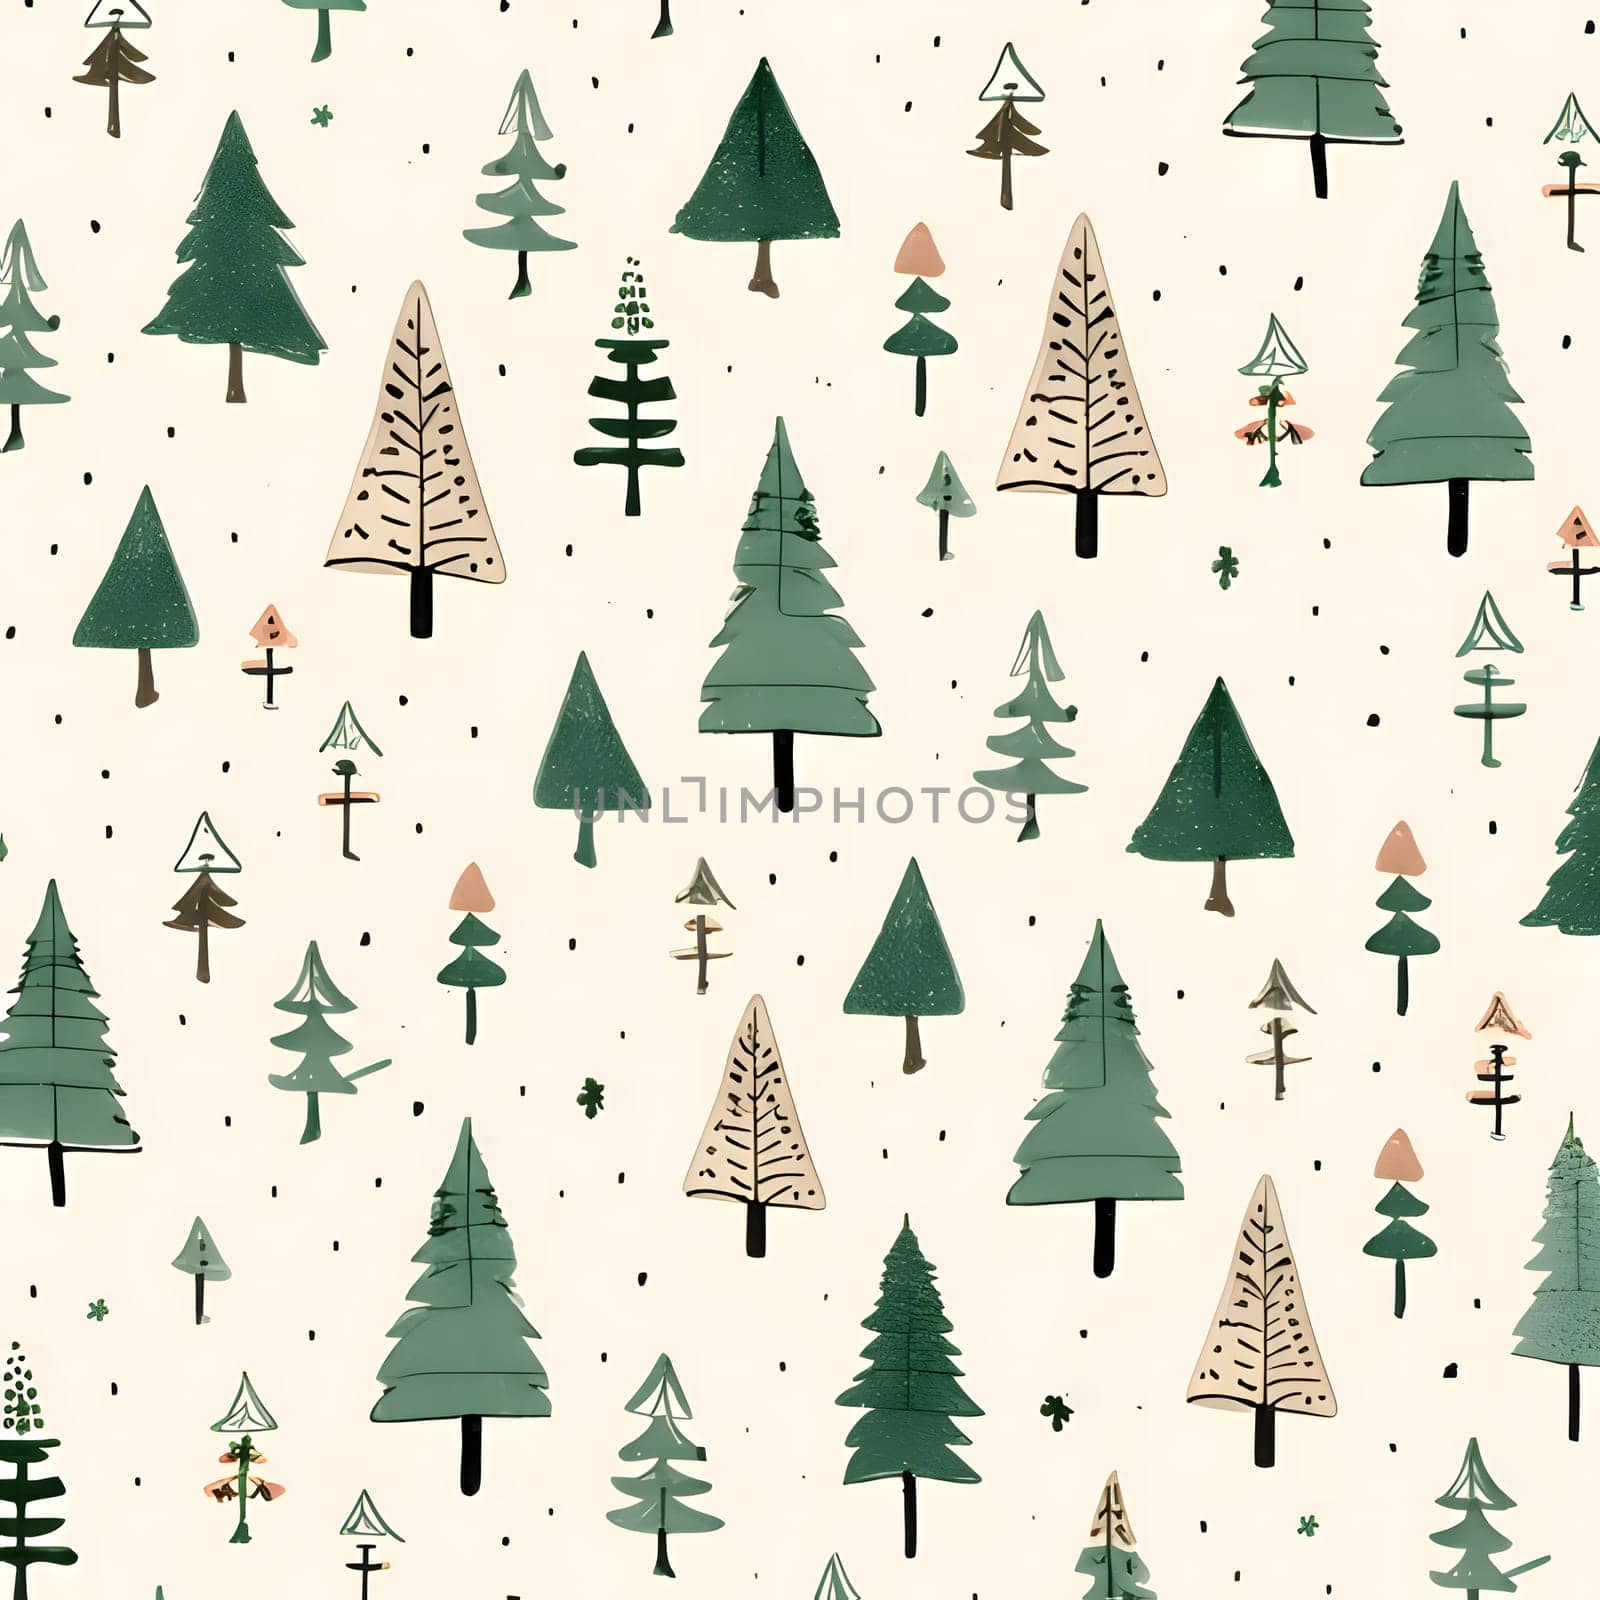 Patterns and banners backgrounds: Seamless pattern with Christmas trees. Hand drawn vector illustration.